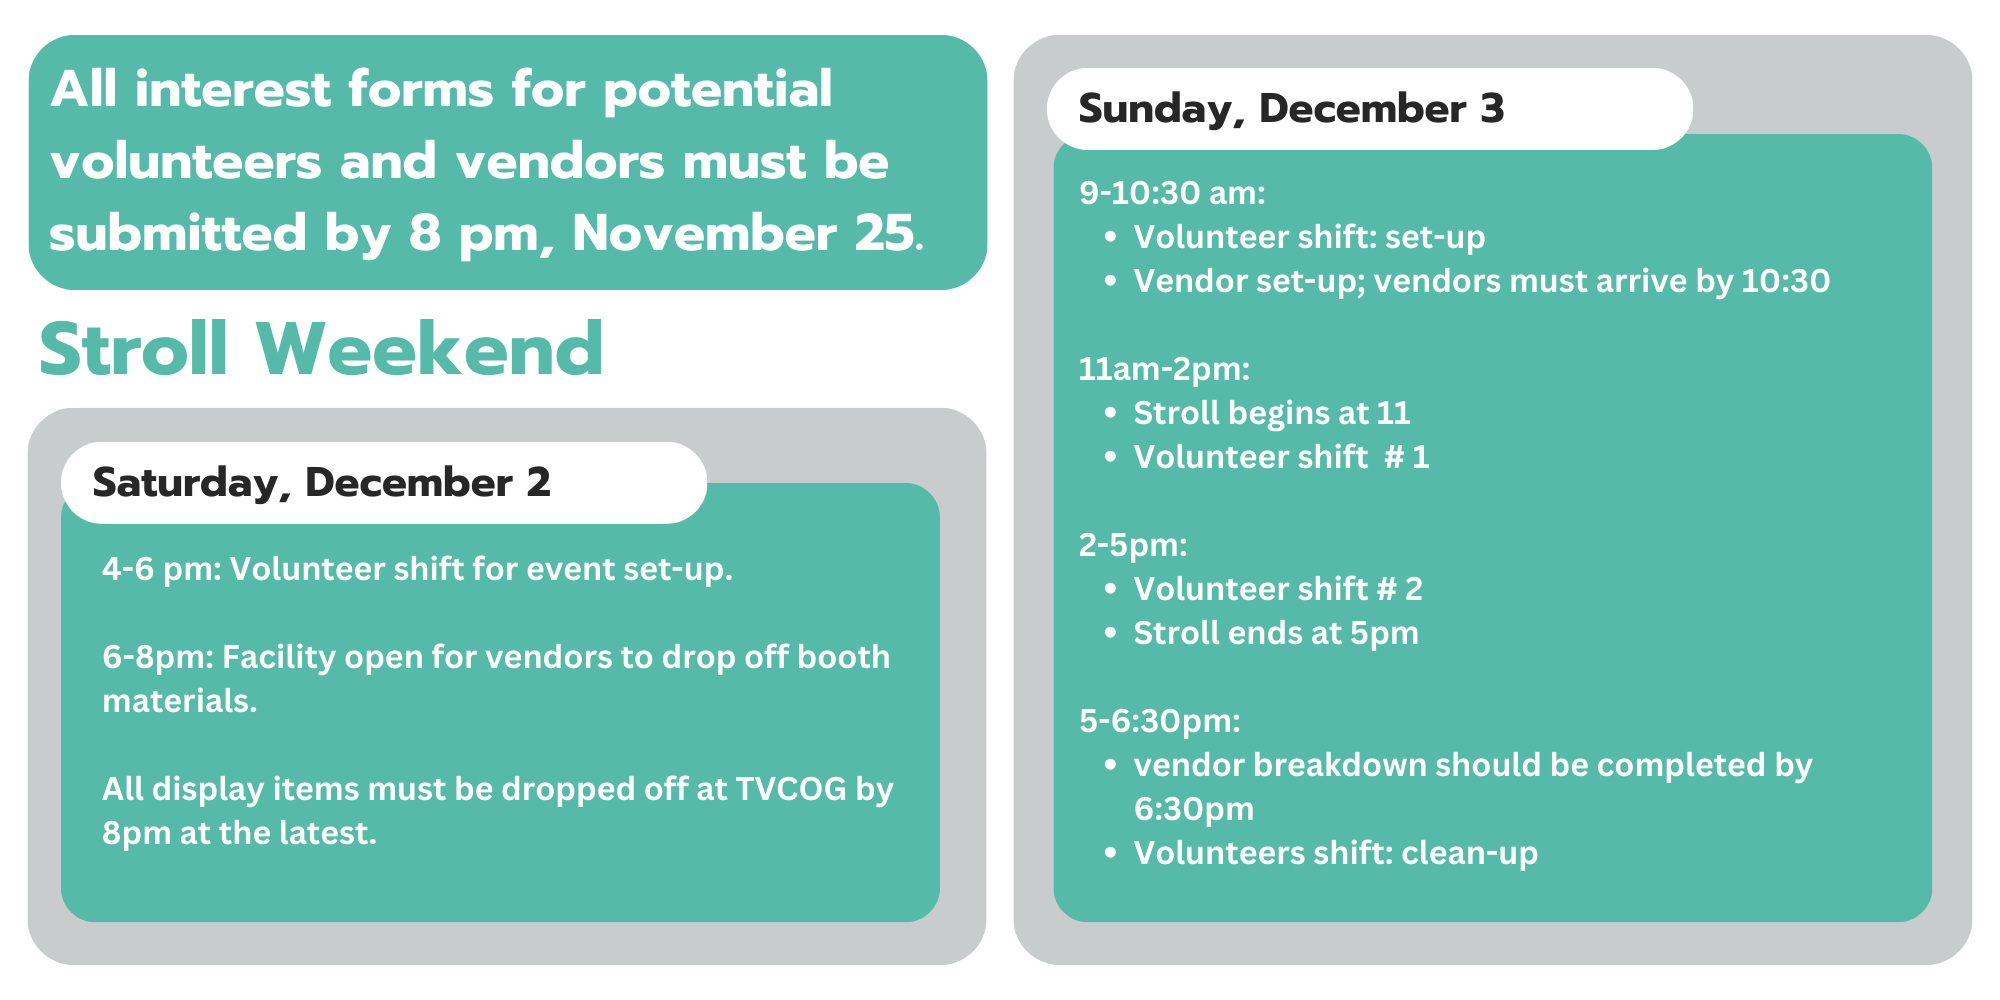 Victorian_Stroll_Schedule_Info_for_Vendors__Volunteers-_Web_Graphic_2.png - 216.70 kB